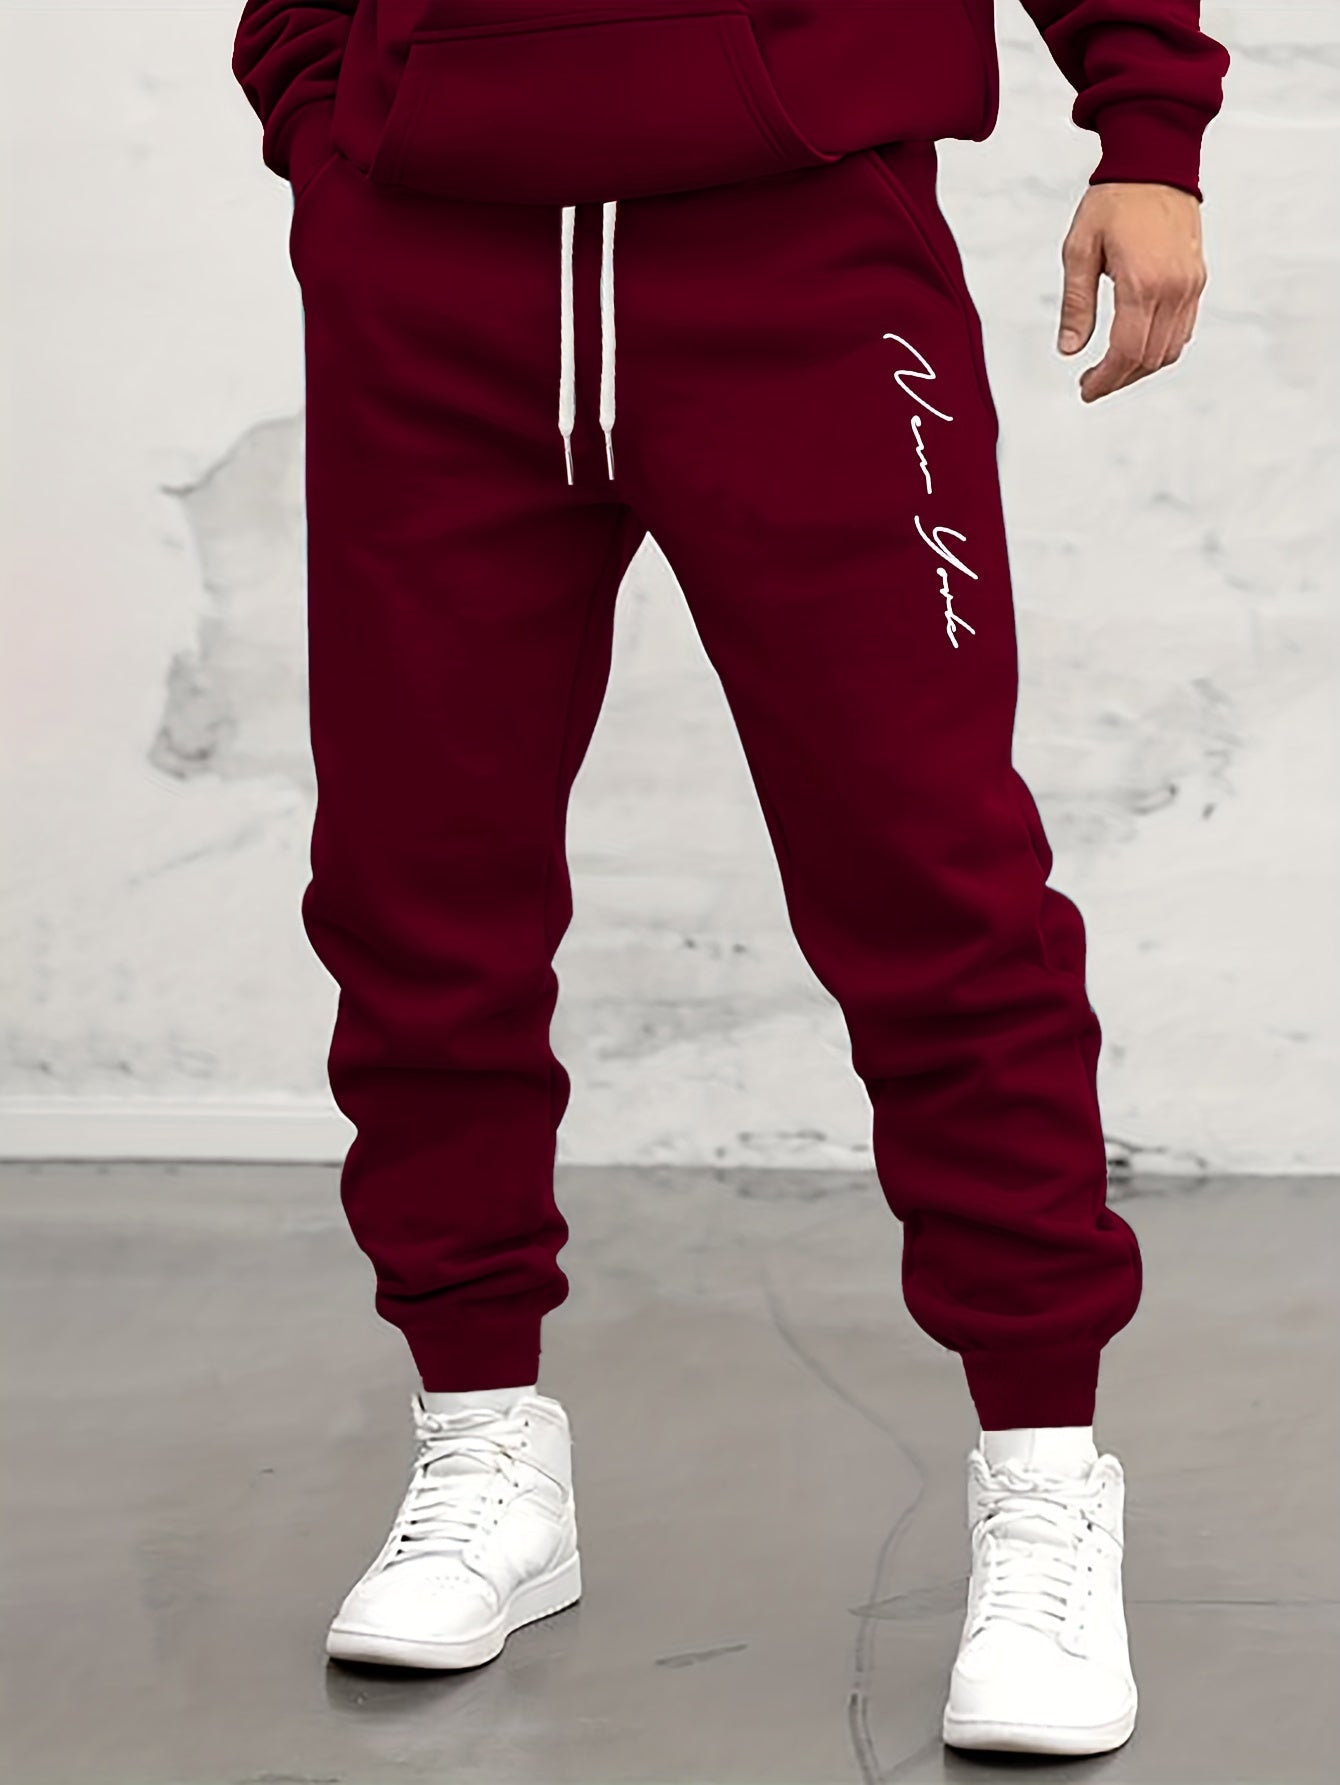 Letter Print Drawstring Sweatpants Loose Fit Pants Men's Casual Slightly Stretch Joggers For Spring Autumn Running Jogging